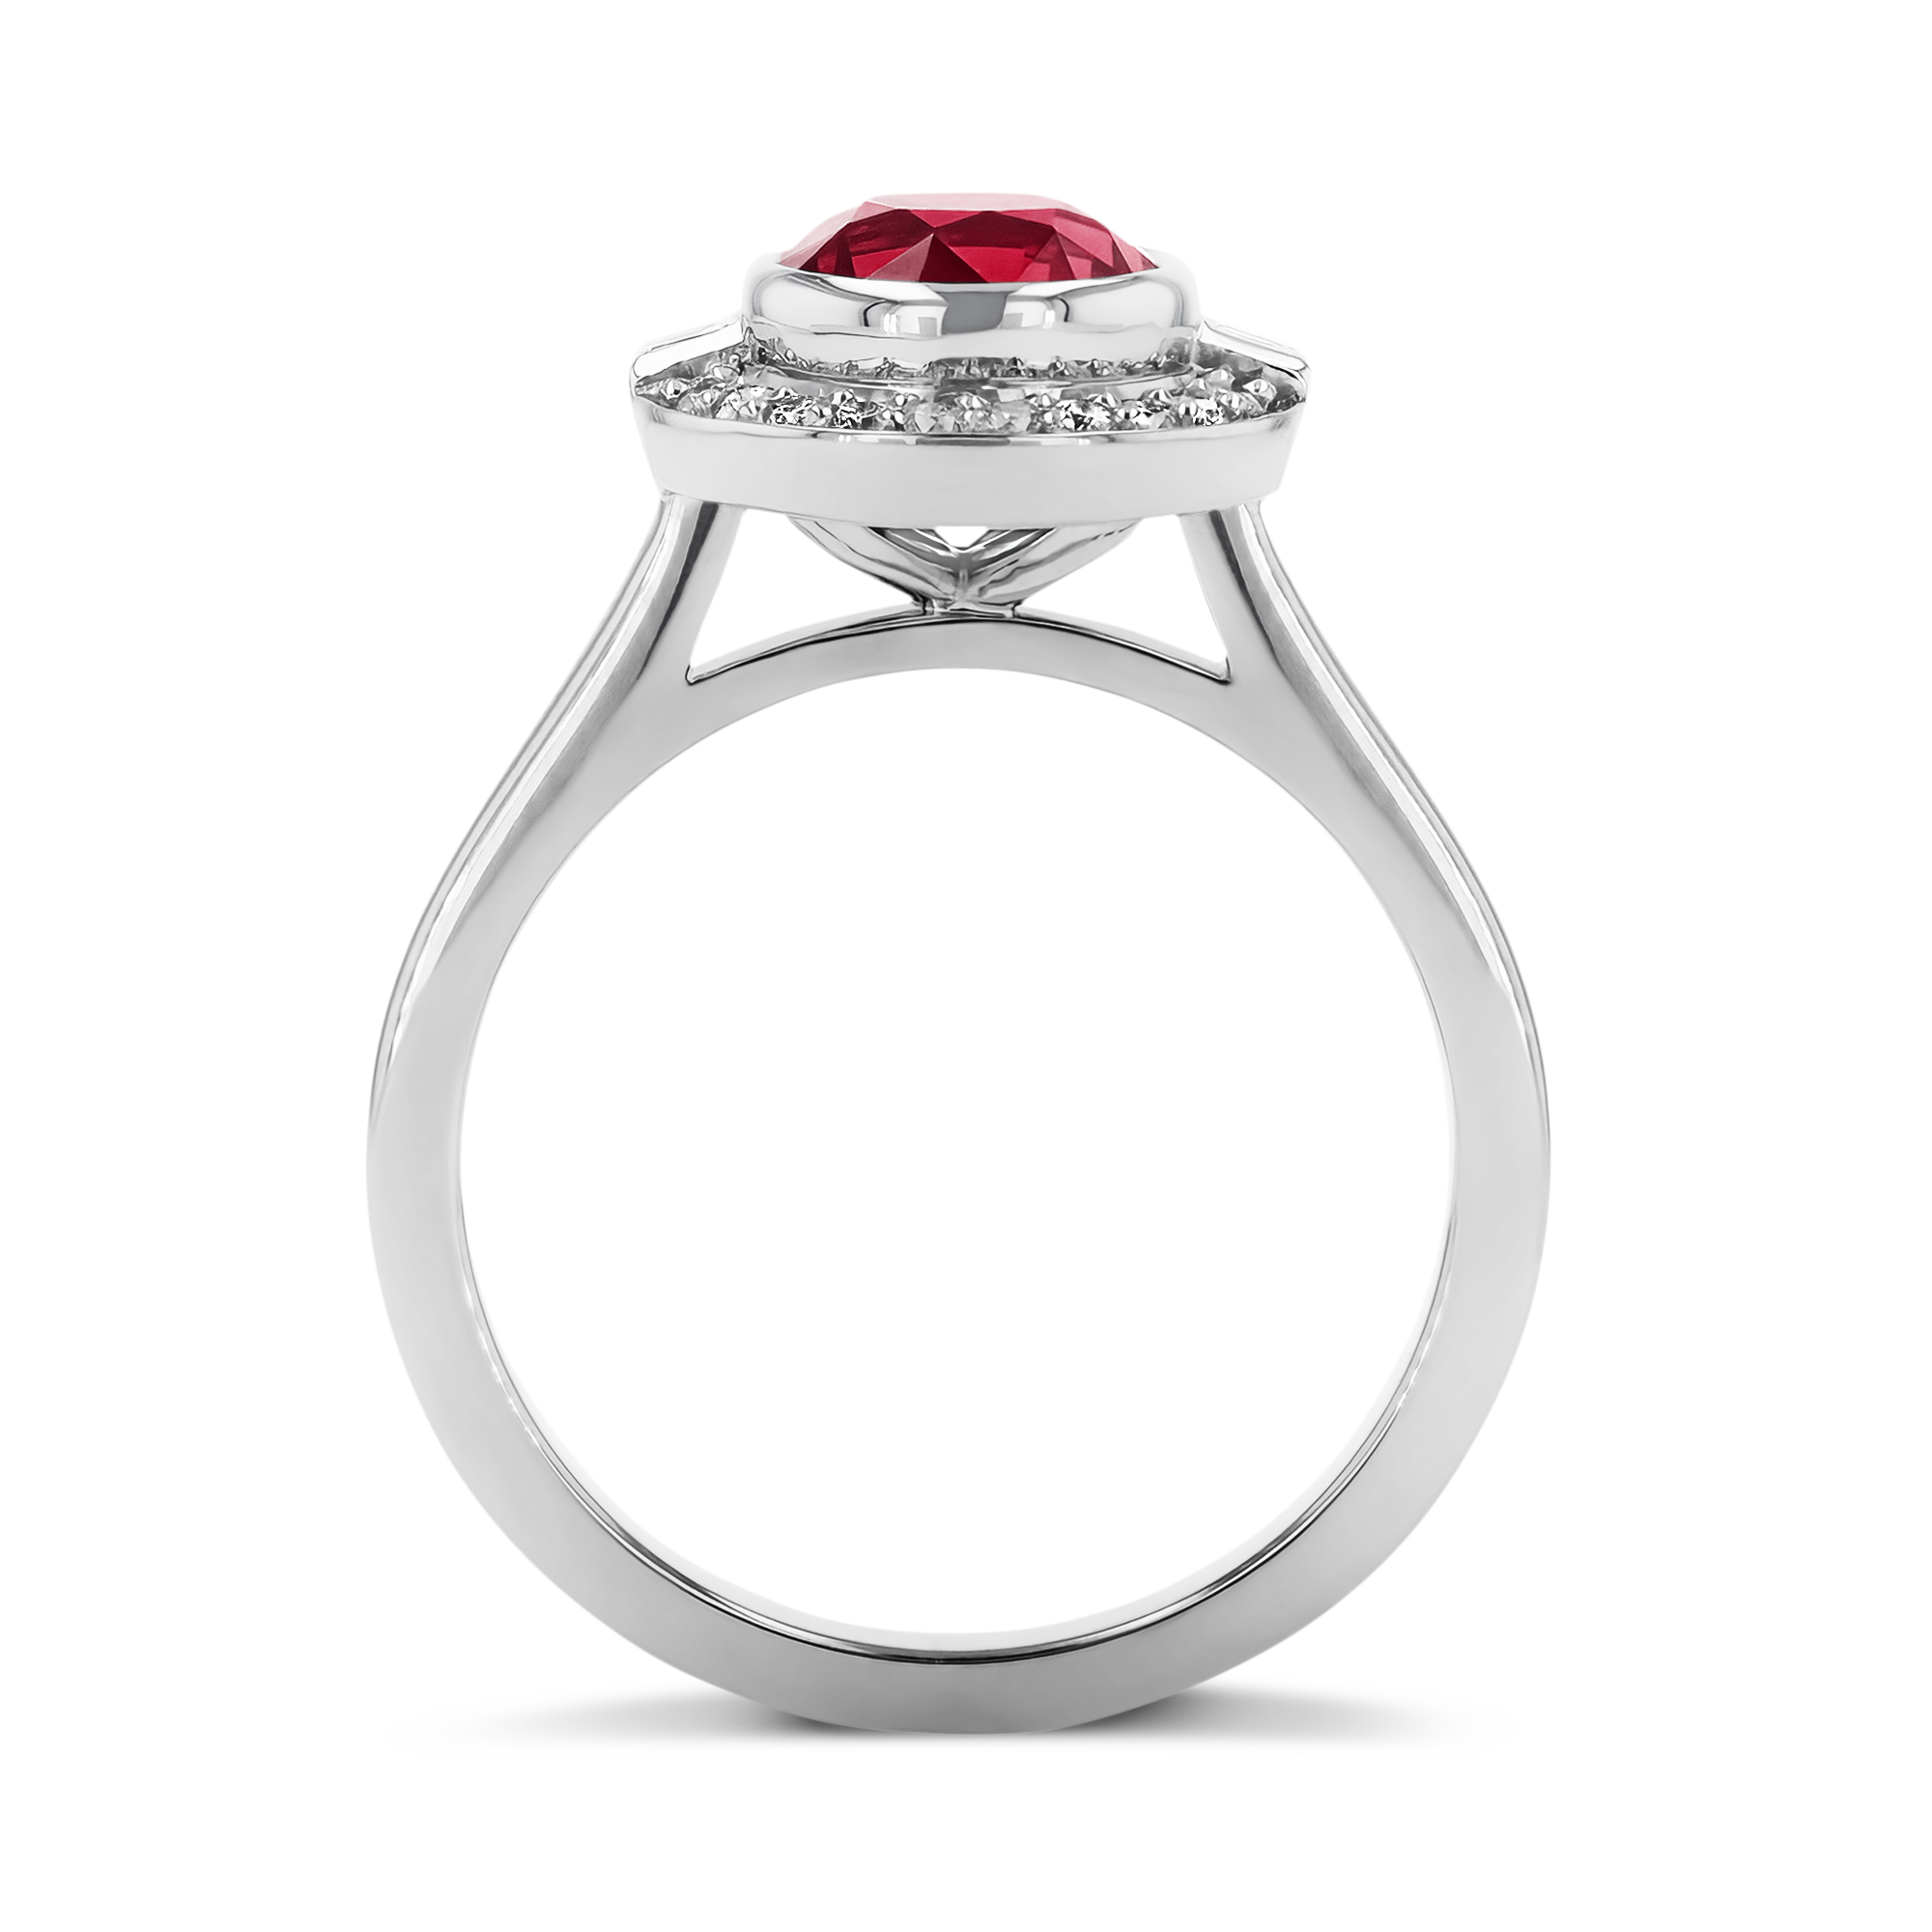 Mozambique 3.01ct Ruby and Diamond Cluster Ring Oval Cut, Rubover Set_3